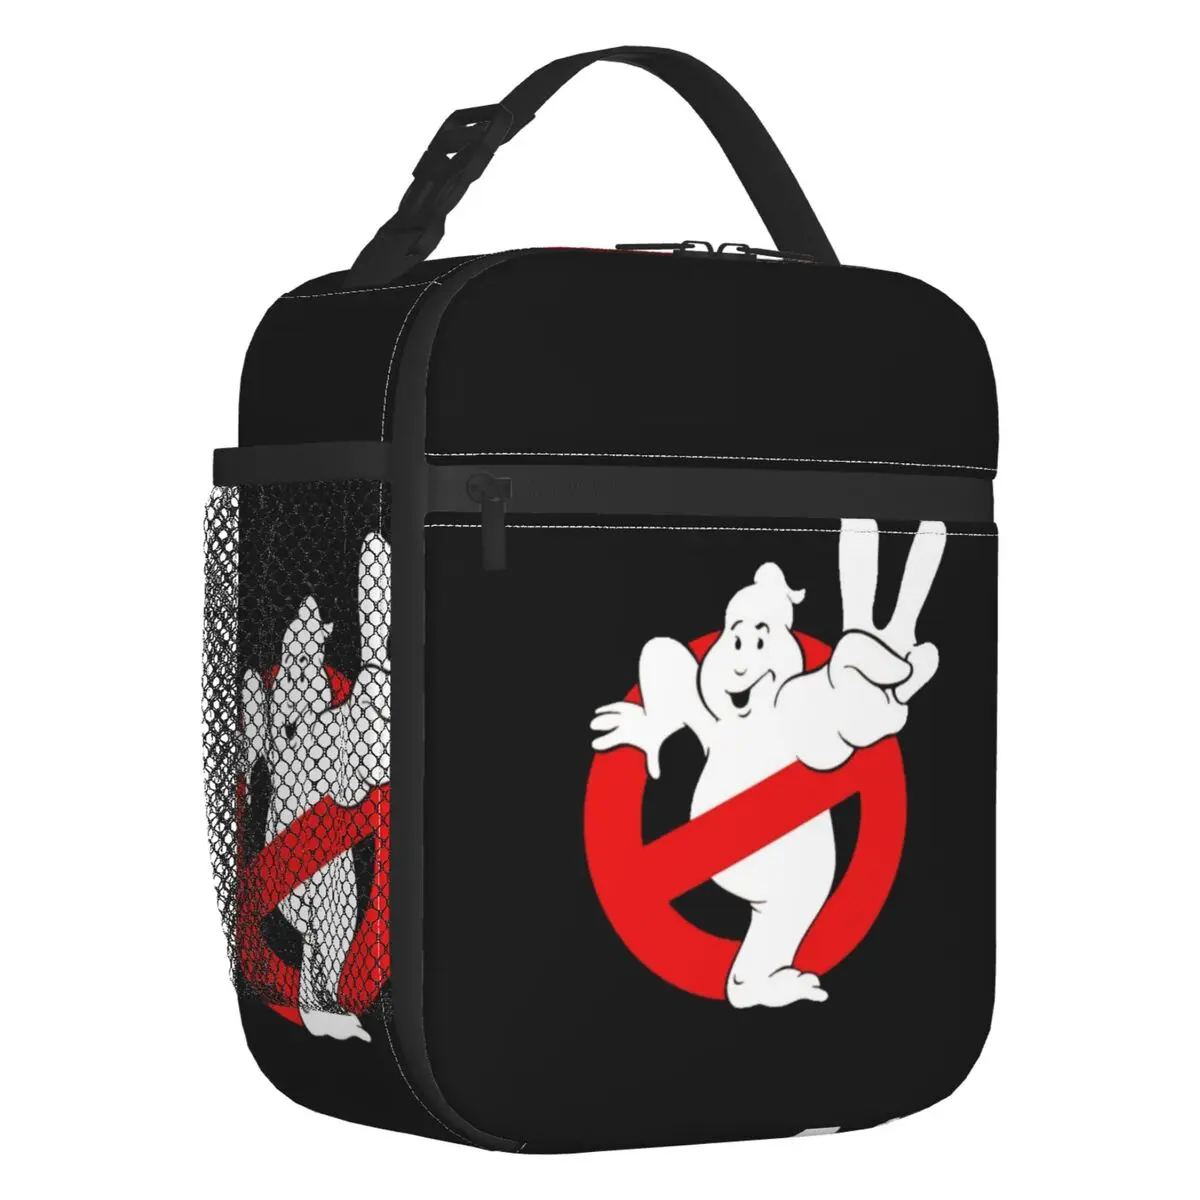 

Cute Ghostbusters Logo Insulated Lunch Bags for Outdoor Picnic Supernatural Comedy Film Portable Cooler Thermal Bento Box Women